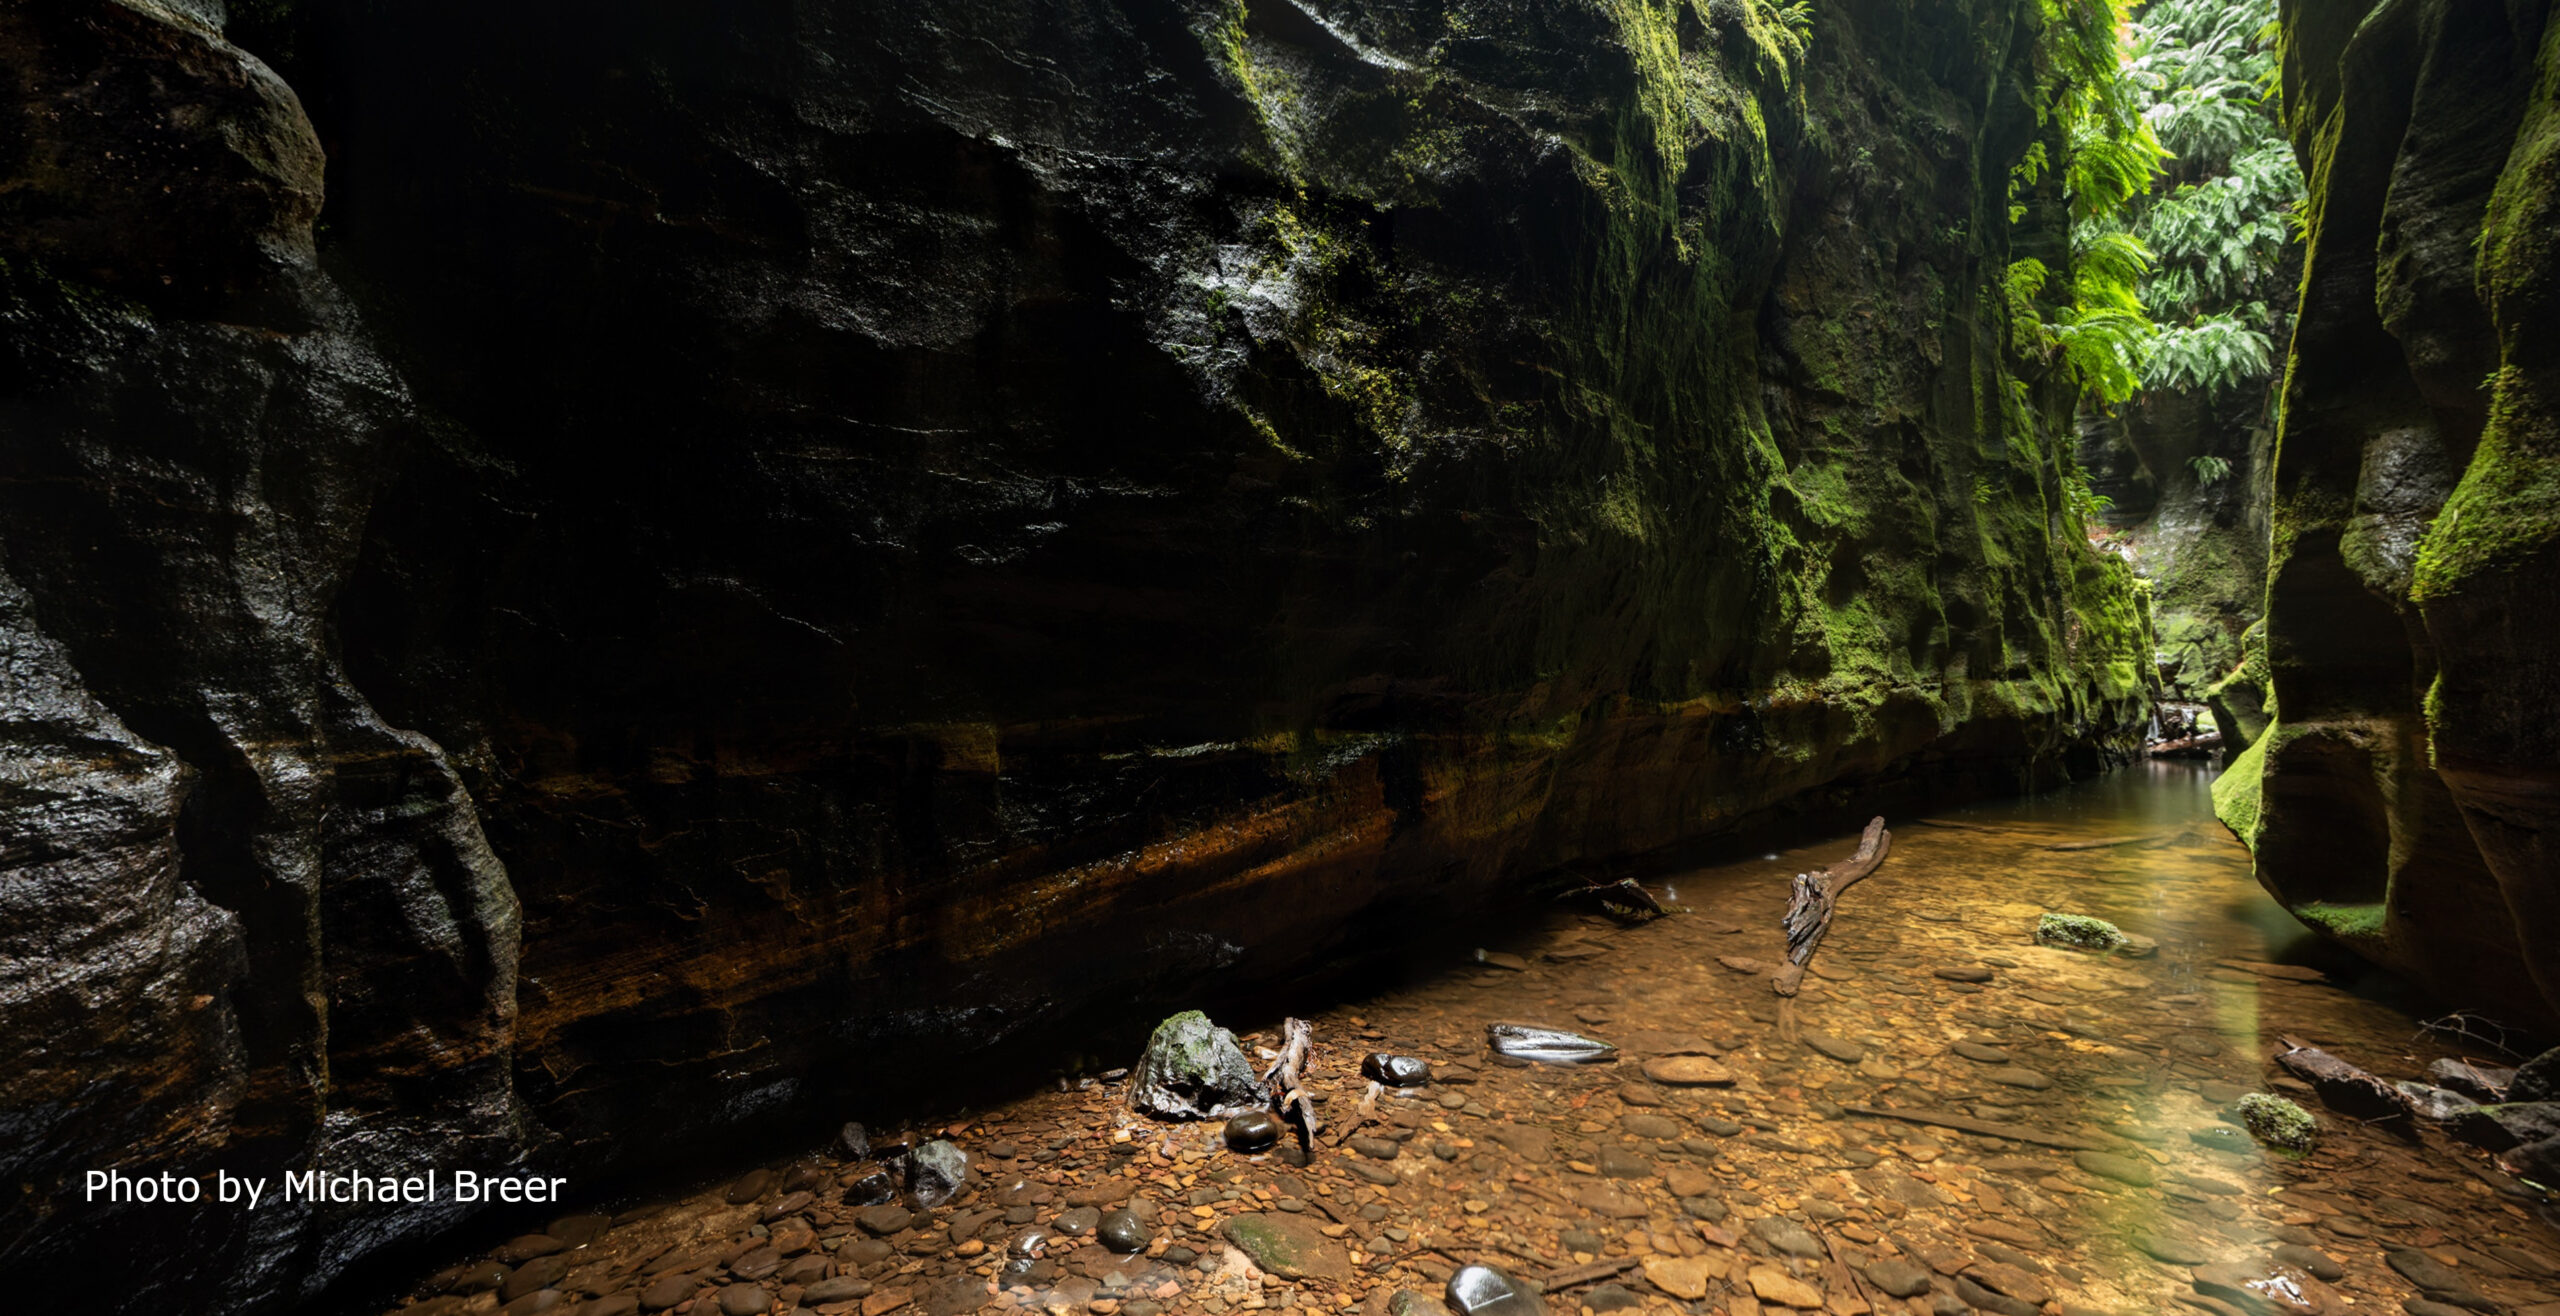 A little river between Claustral Canyon walls photographed by Michael Breer will be turned to Virtual Reality experience